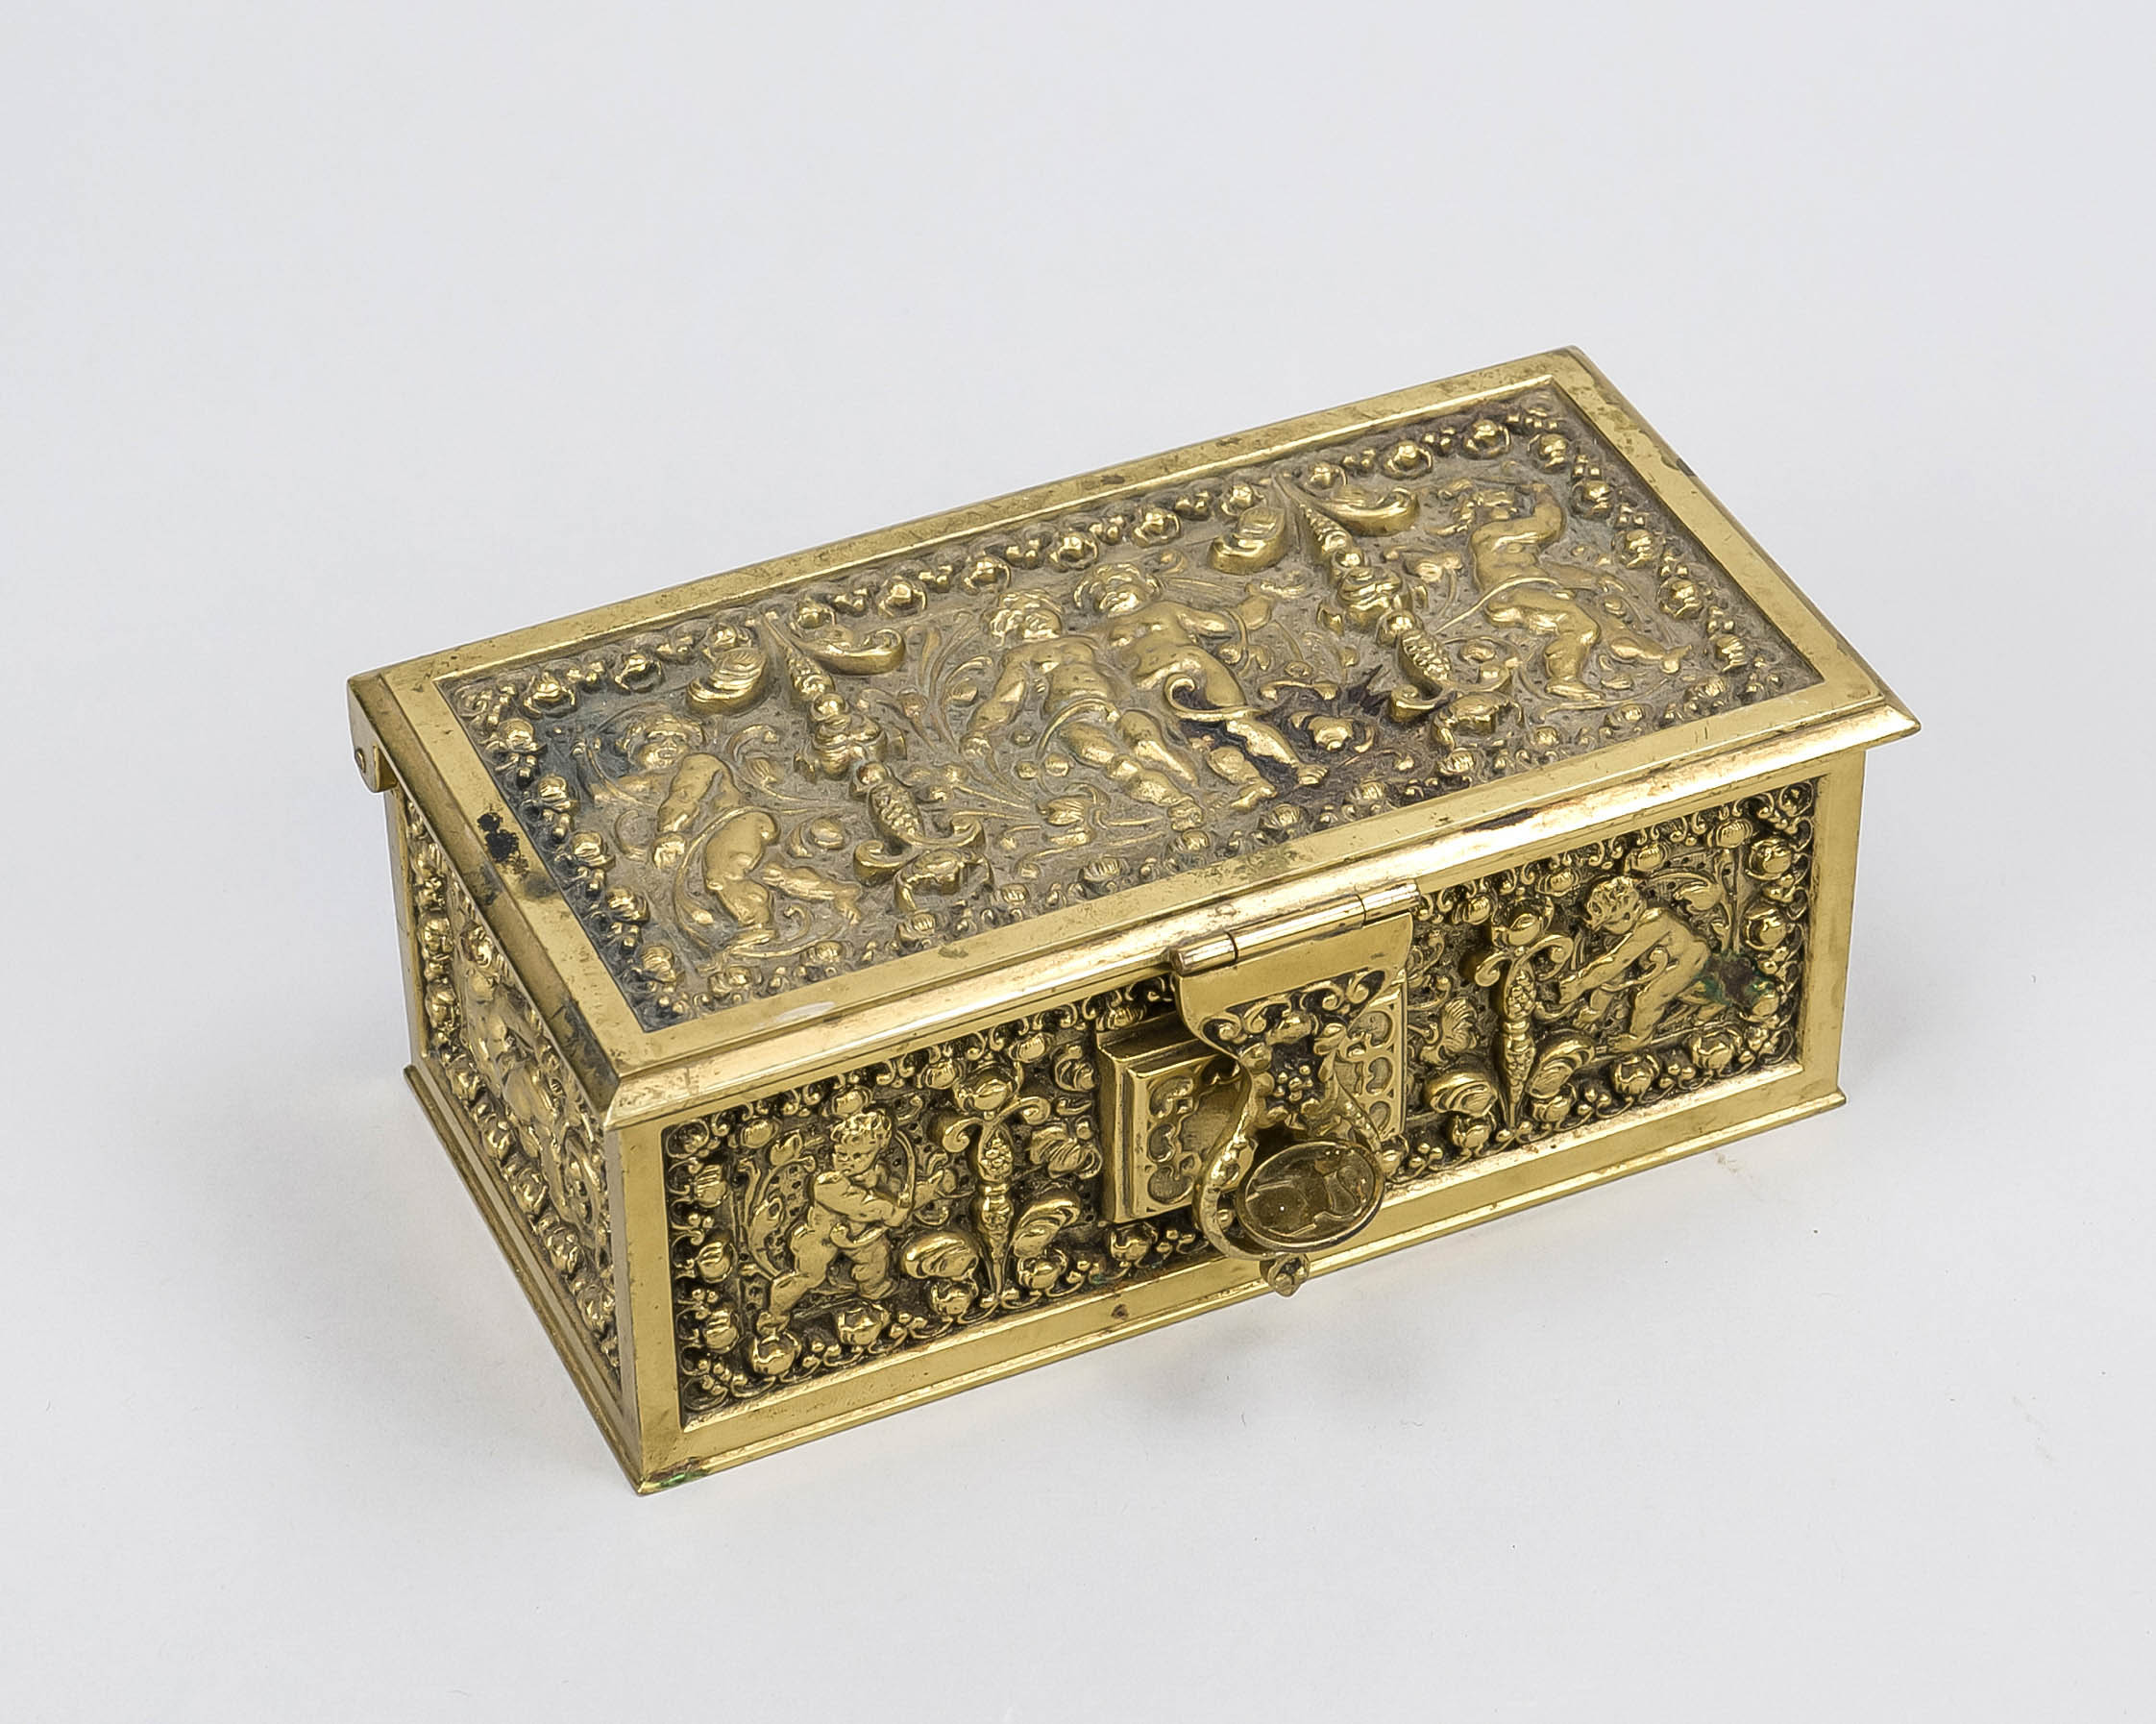 Small casket, Germany 19th/20th century, Erhard & Söhne, brass body with relief decoration in